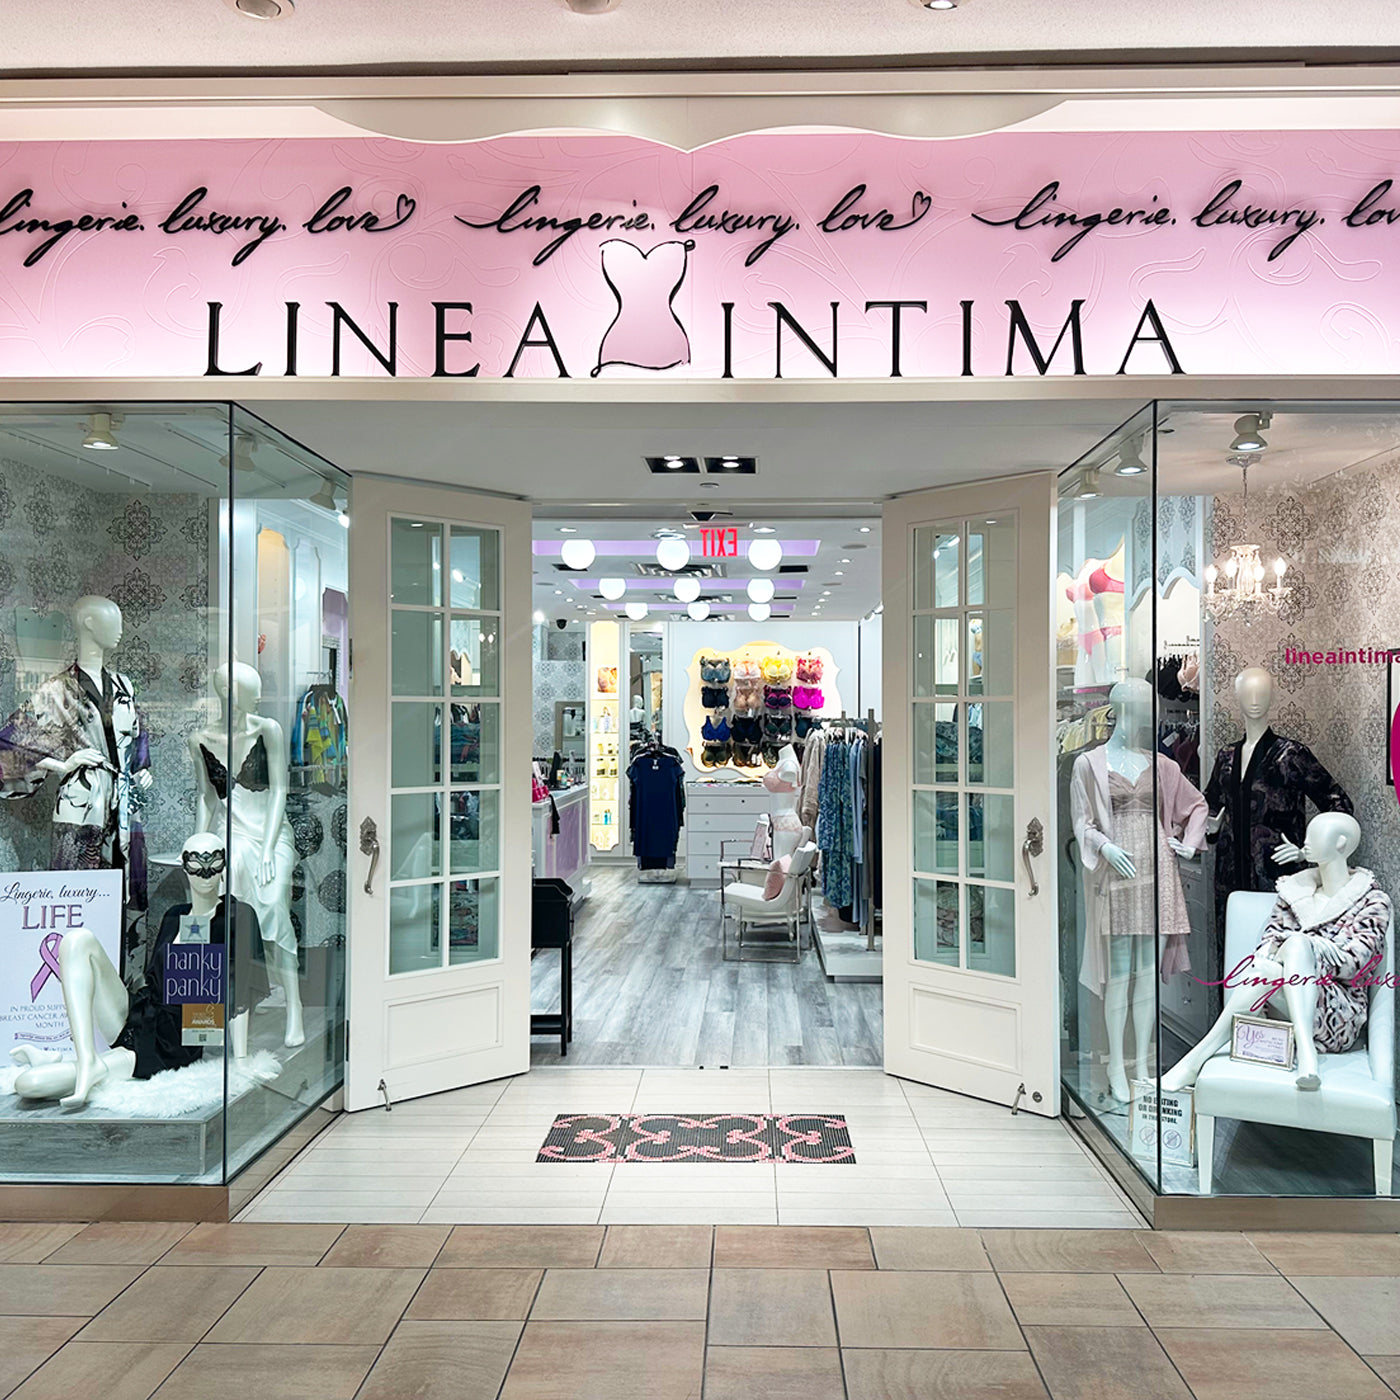 WORLDWIDE BOUTIQUES by Intima